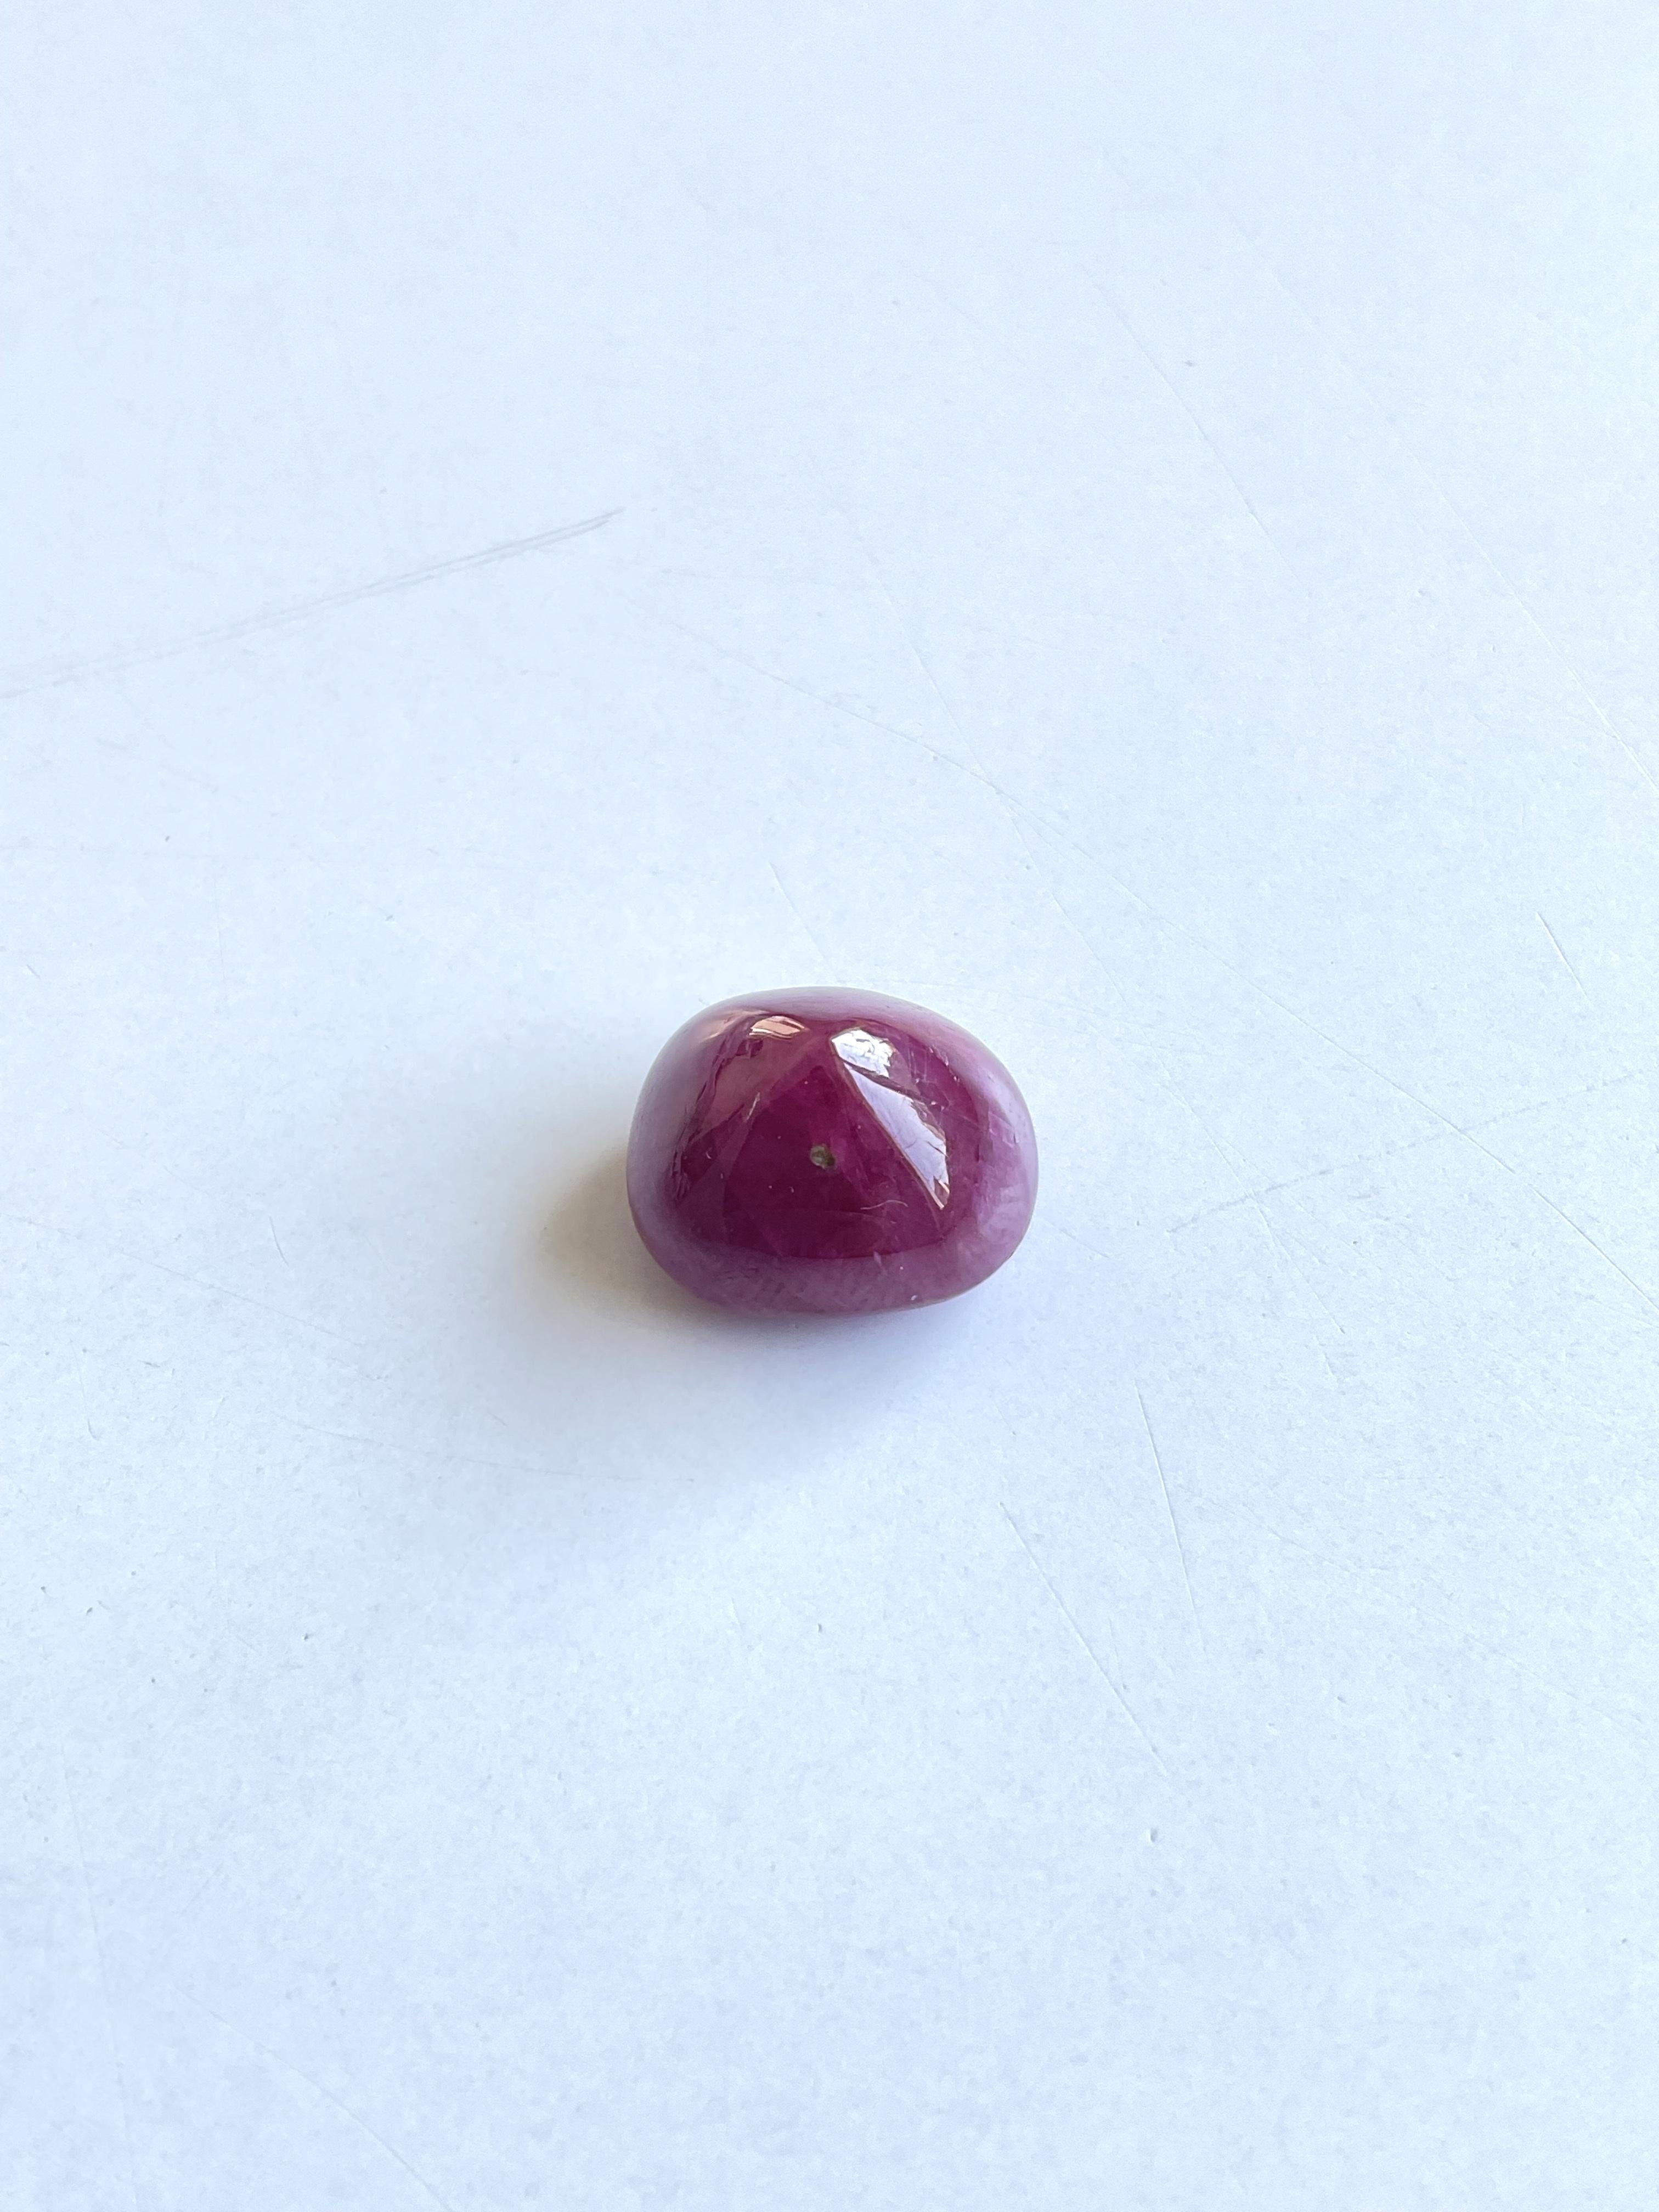 18.52 Carats Burmese No-Heat Ruby Natural Sugarloaf For Top Fine Jewelry Gem For Sale 1